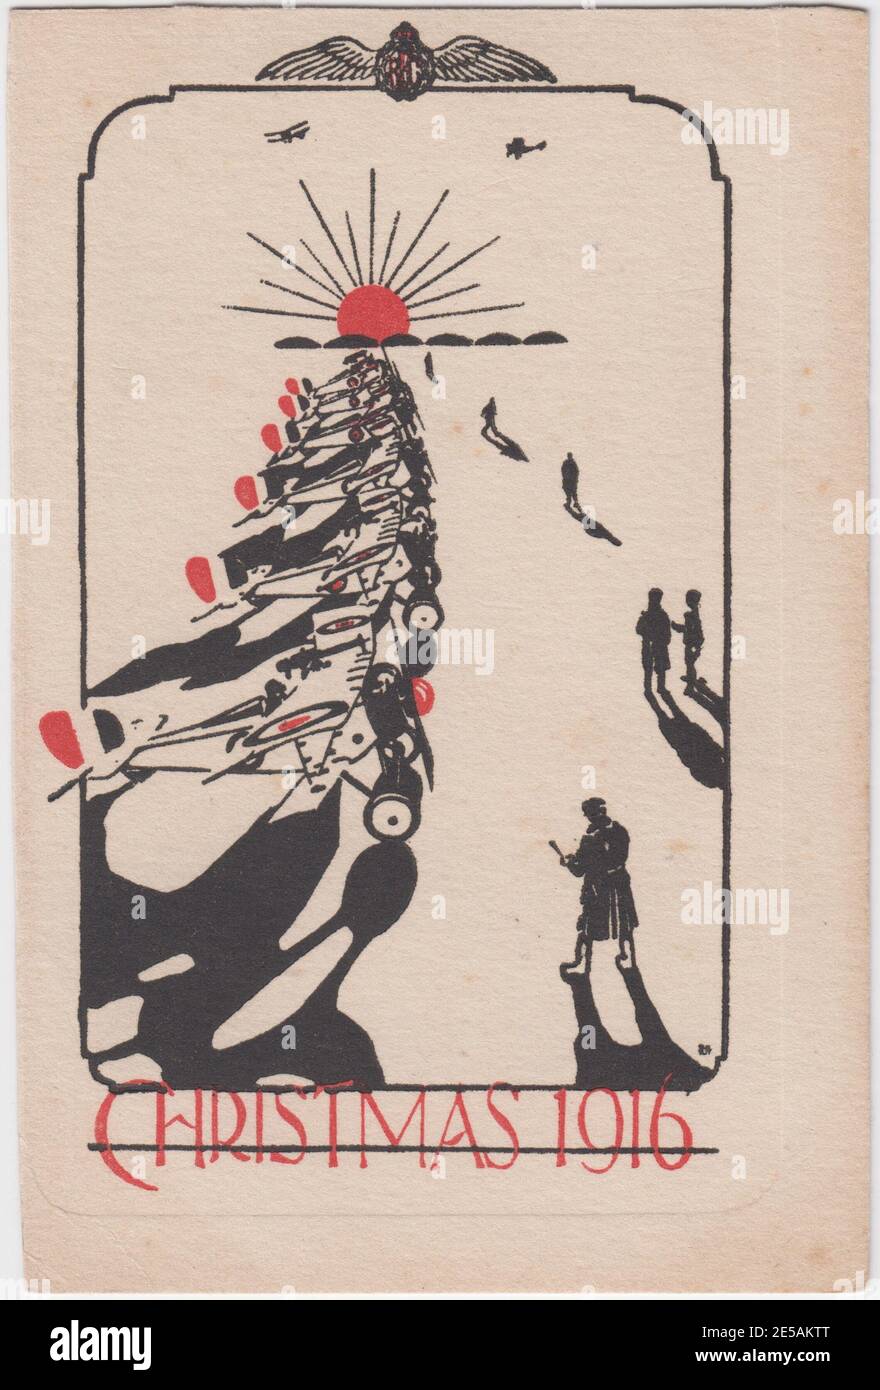 Royal Flying Corps First World War Christmas card for 1916. The image includes the RFC crest at the top and shows a line of aeroplanes leading to a sun setting behind six hangers. Six figures - RFC personnel - are on one side, checking notebooks, looking at the planes and walking away. Stock Photo